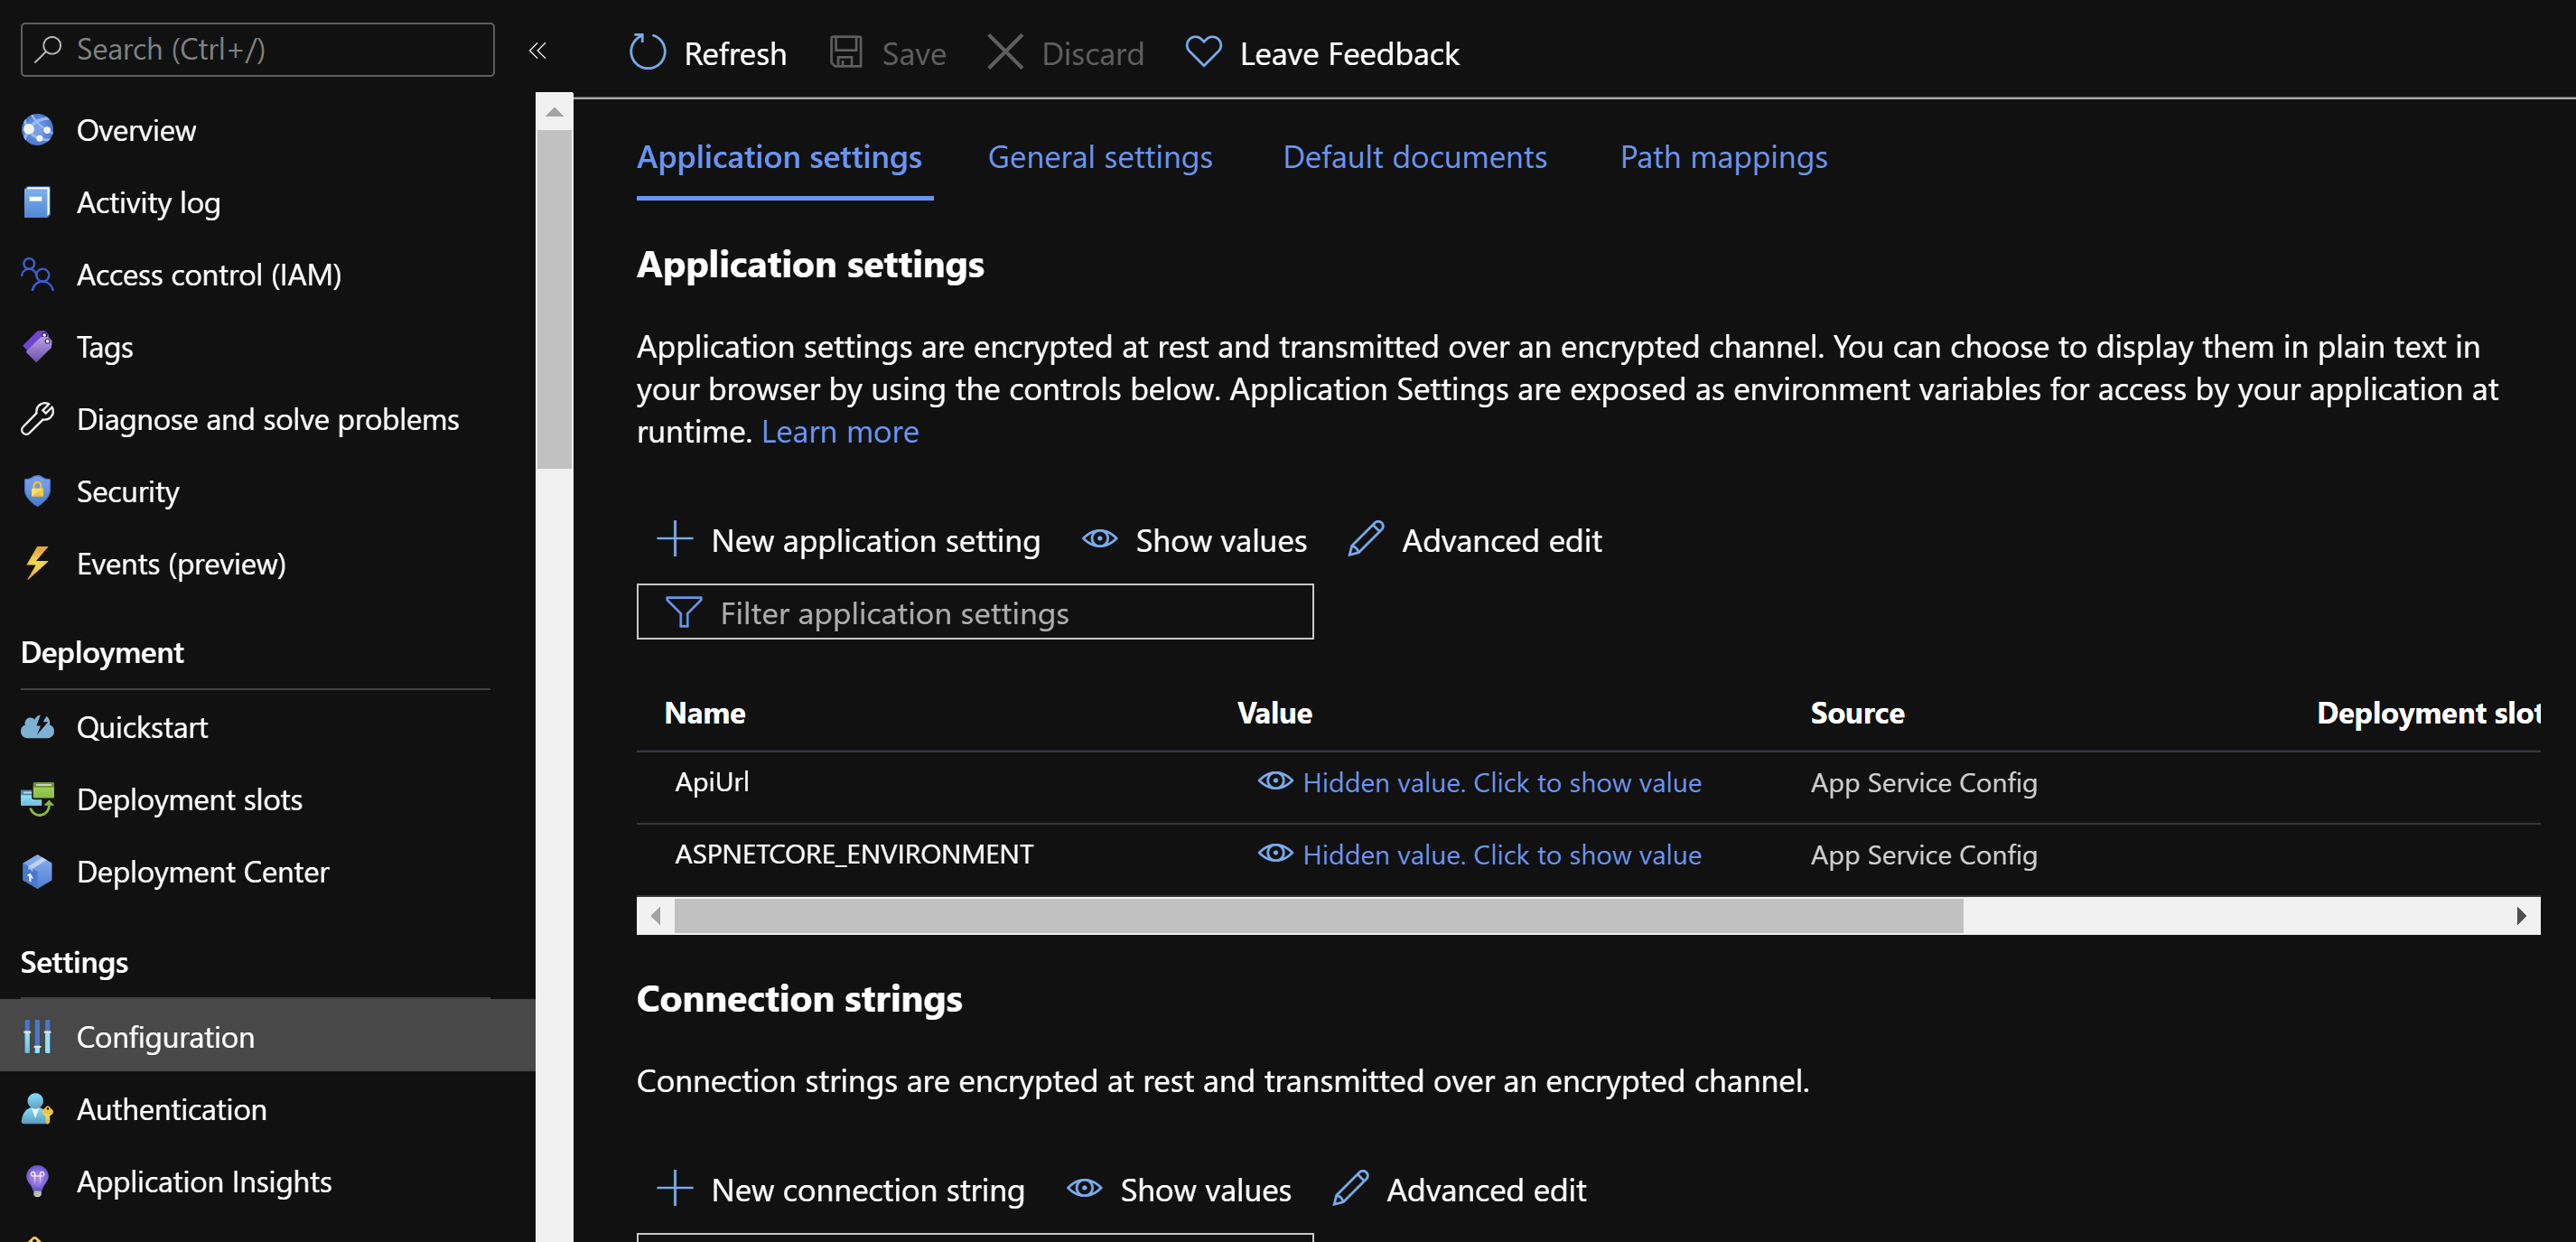 Application settings in the configuration of an App Service.